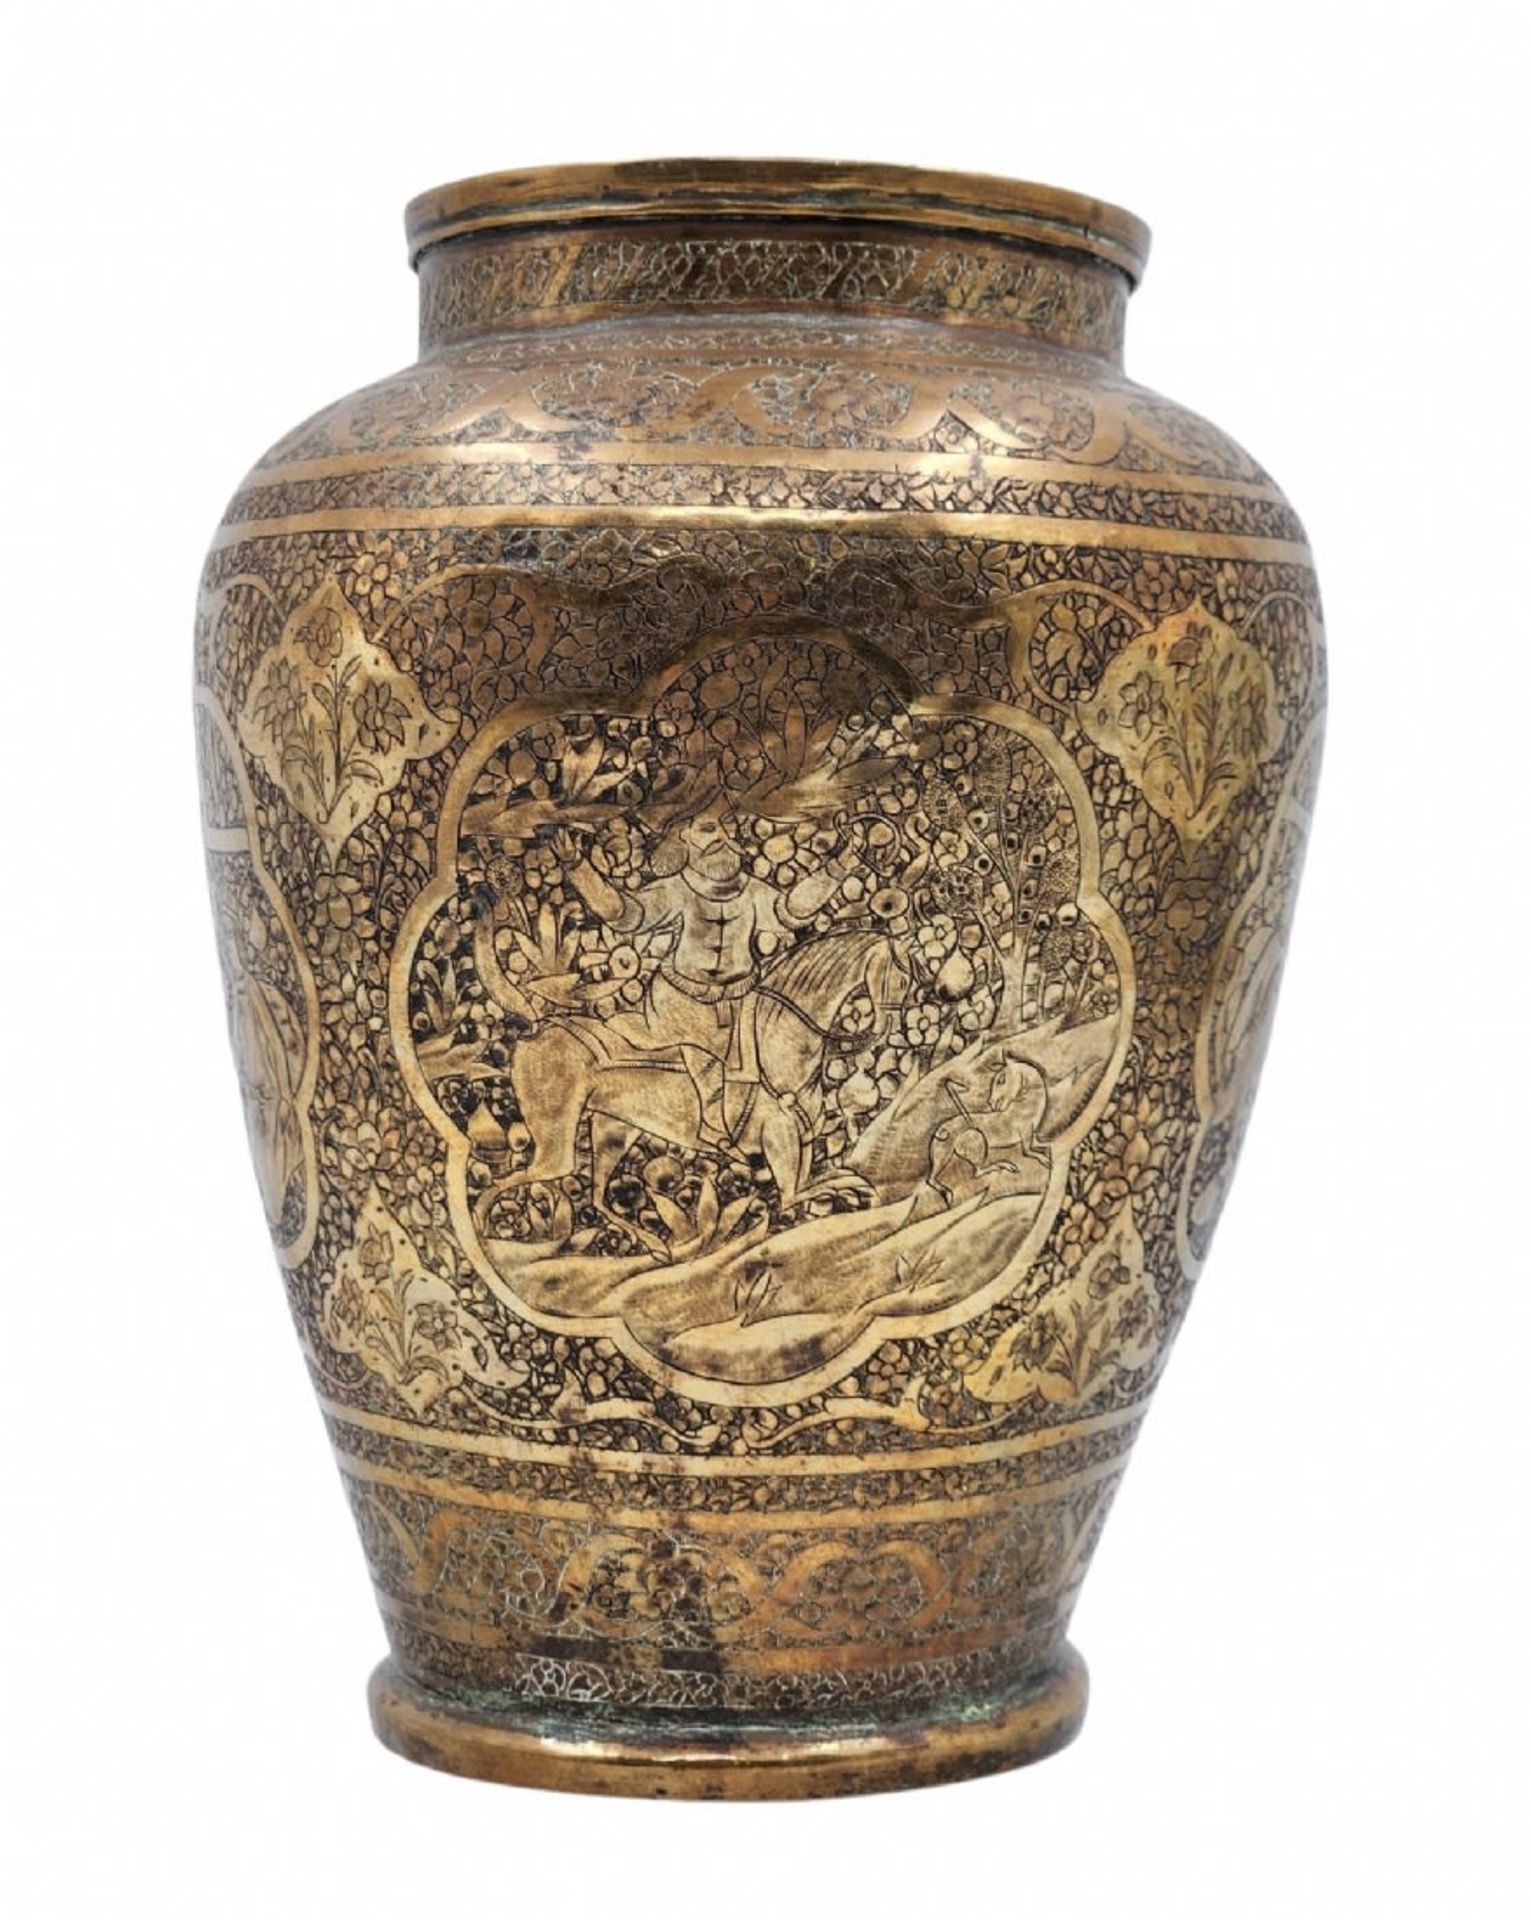 An antique Persian Hindu Urn, beautiful and especially high-quality 19th century urn, made of brass, - Image 2 of 6